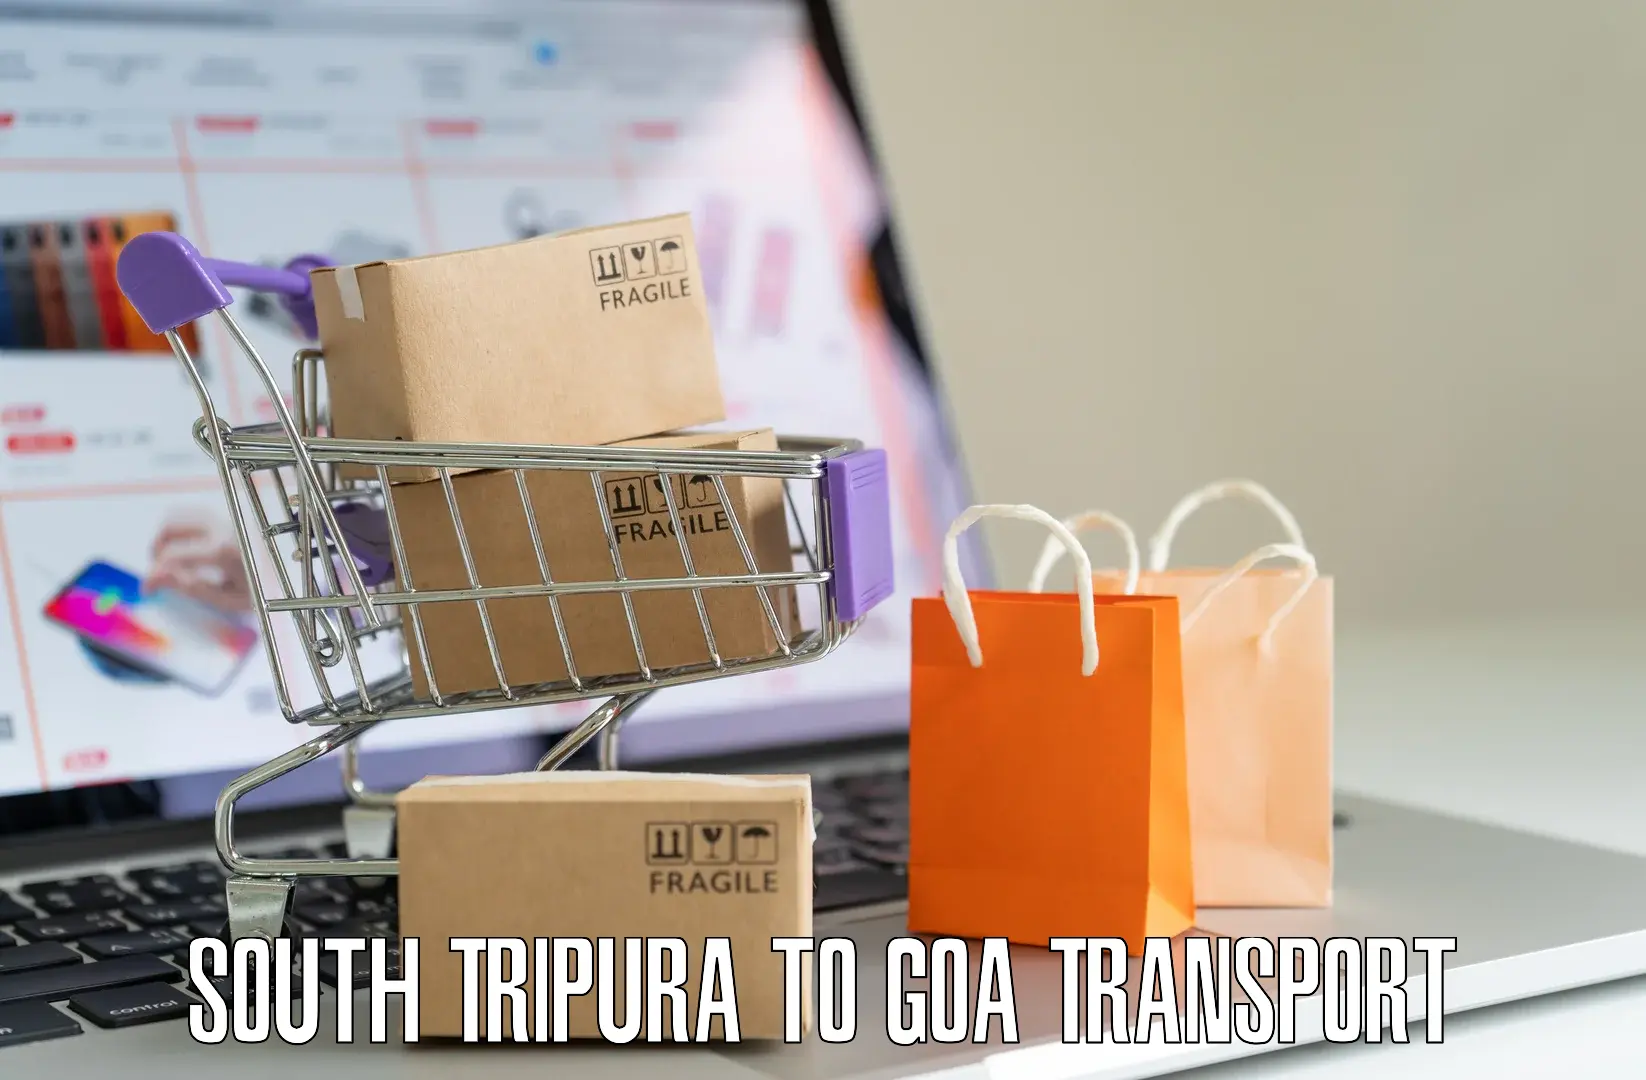 Nearby transport service South Tripura to IIT Goa